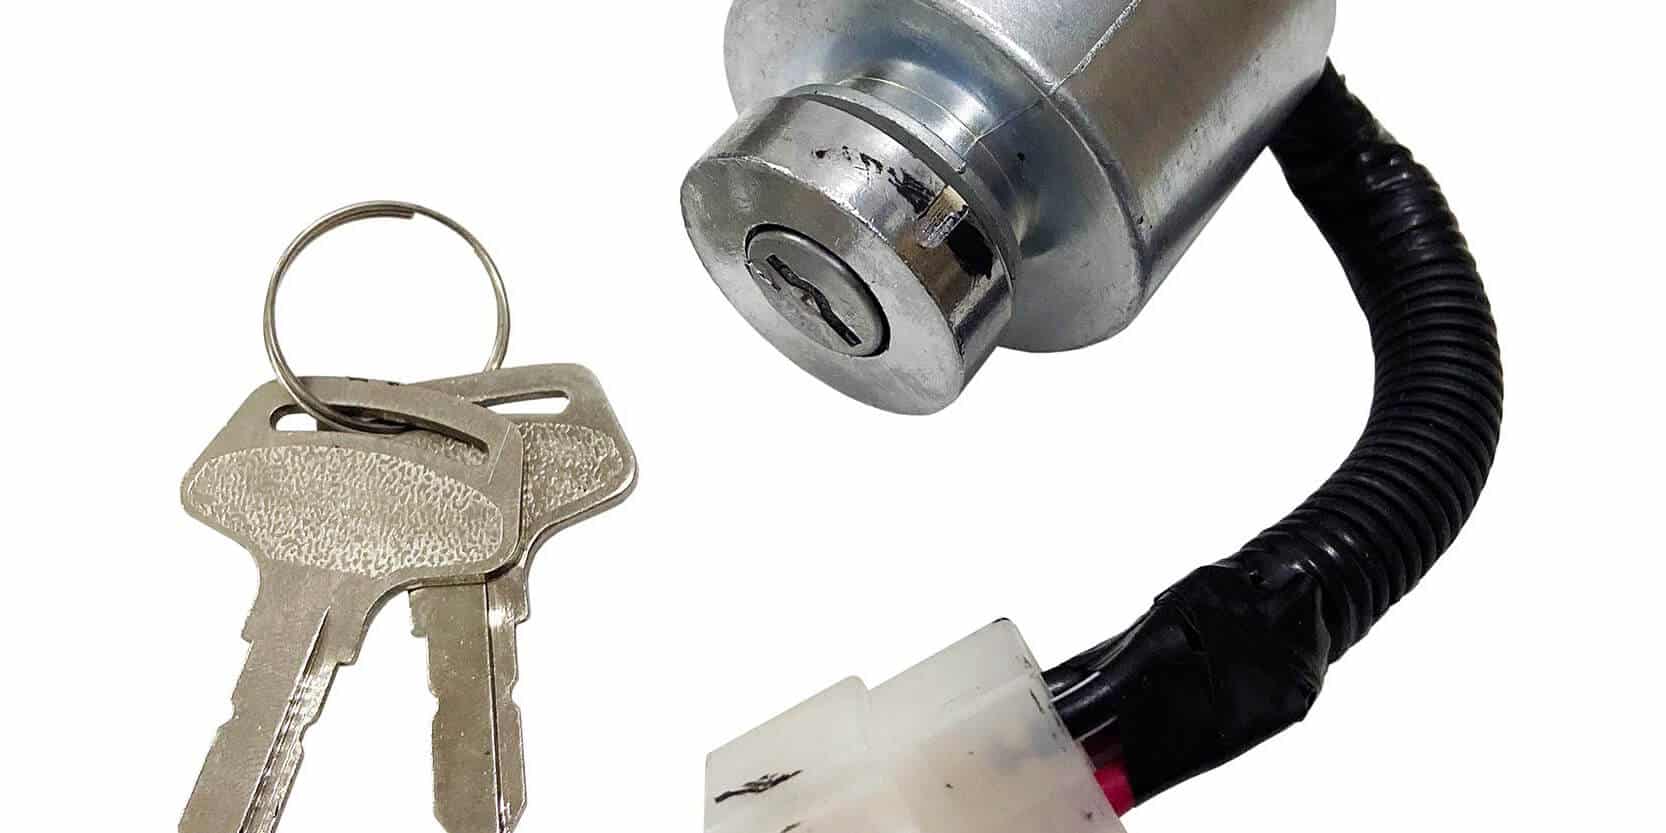 ignition key replacement - M&N Locksmith Chicagos